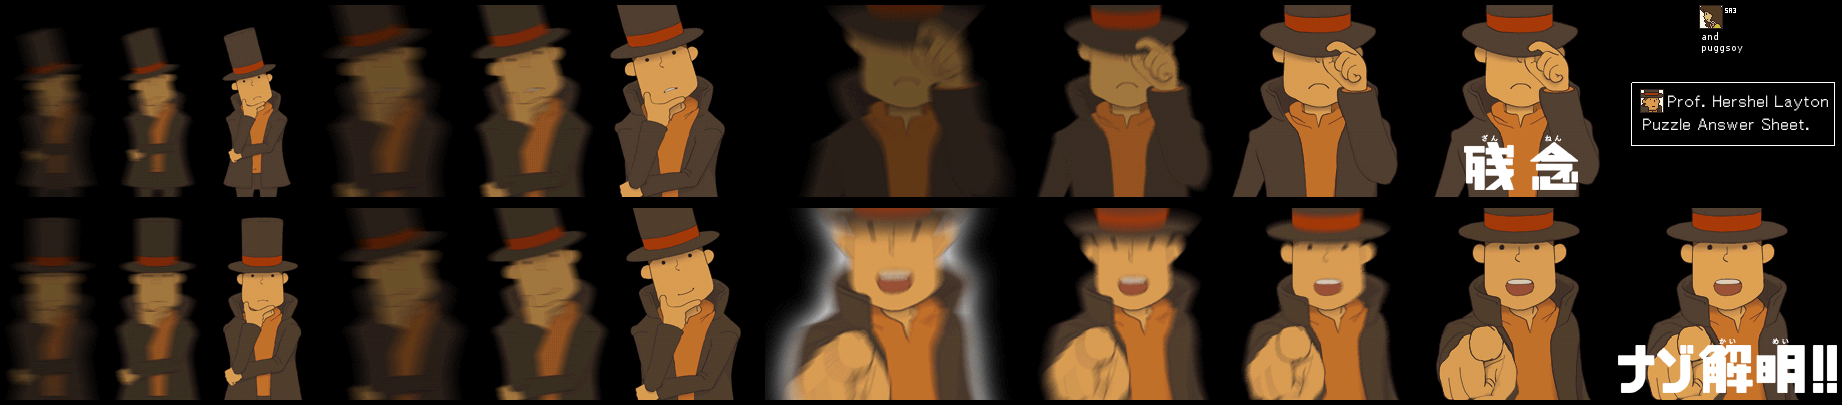 Professor Layton and the Last Specter - Layton Puzzle Answer